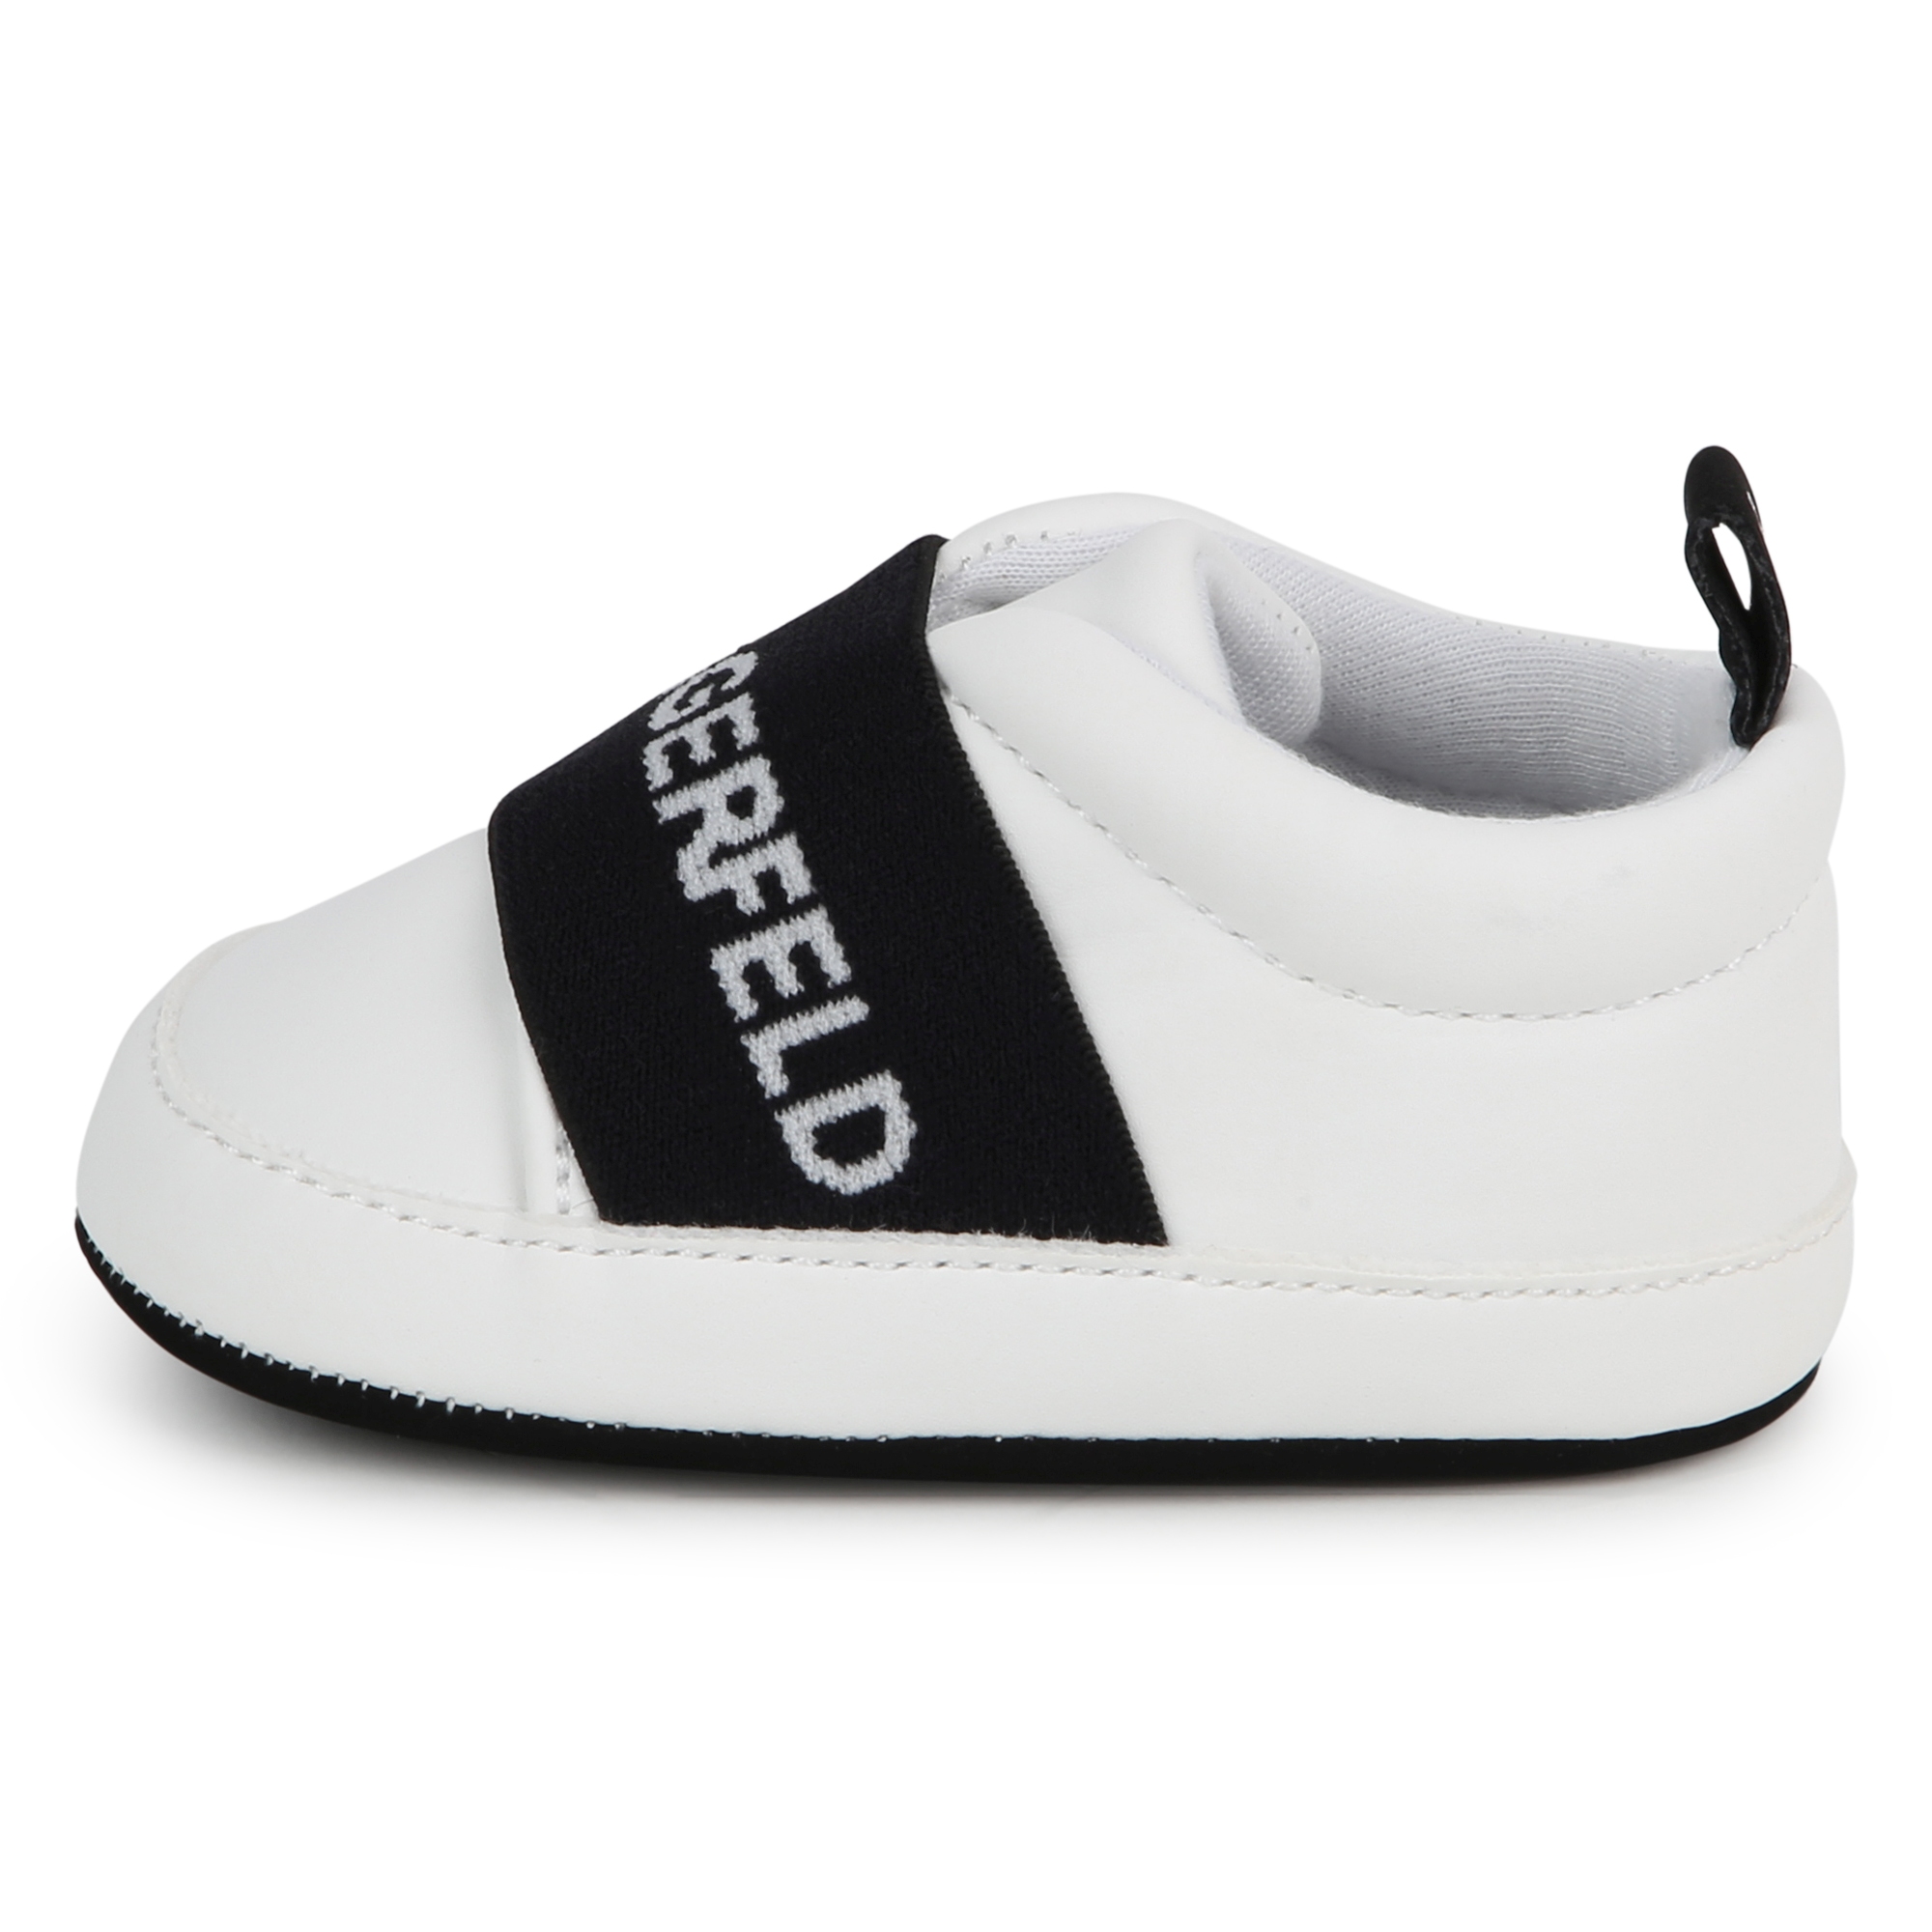 Chaussons fantaisie KARL LAGERFELD KIDS pour UNISEXE